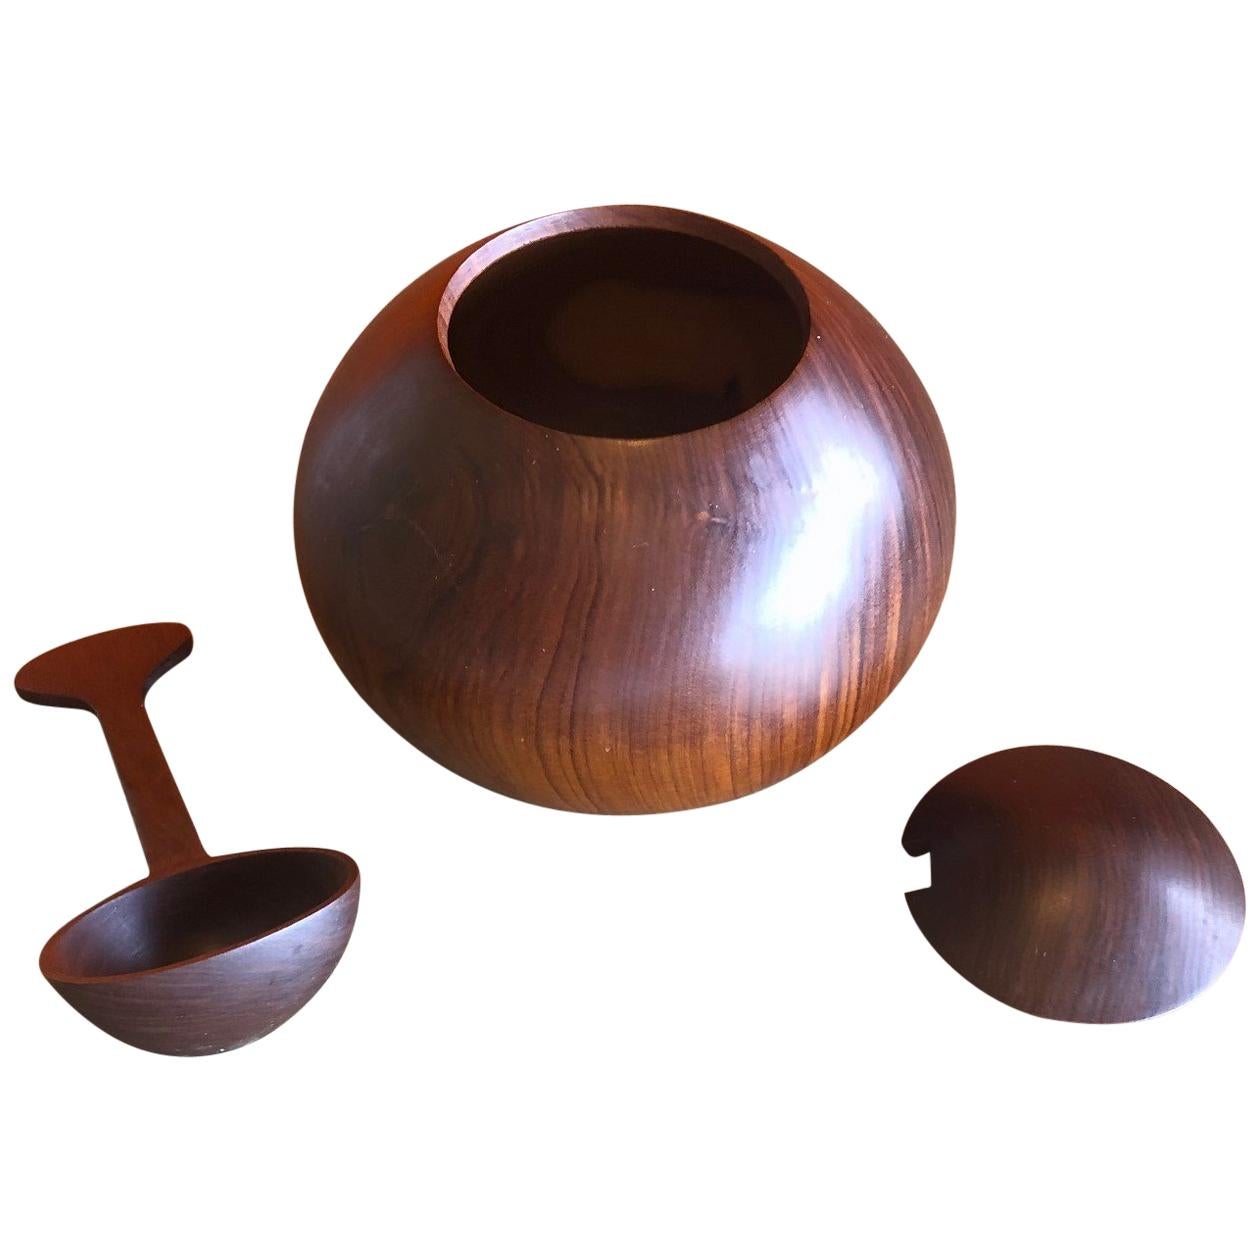 Danish Modern Rosewood Sugar Bowl with Spoon and Lid